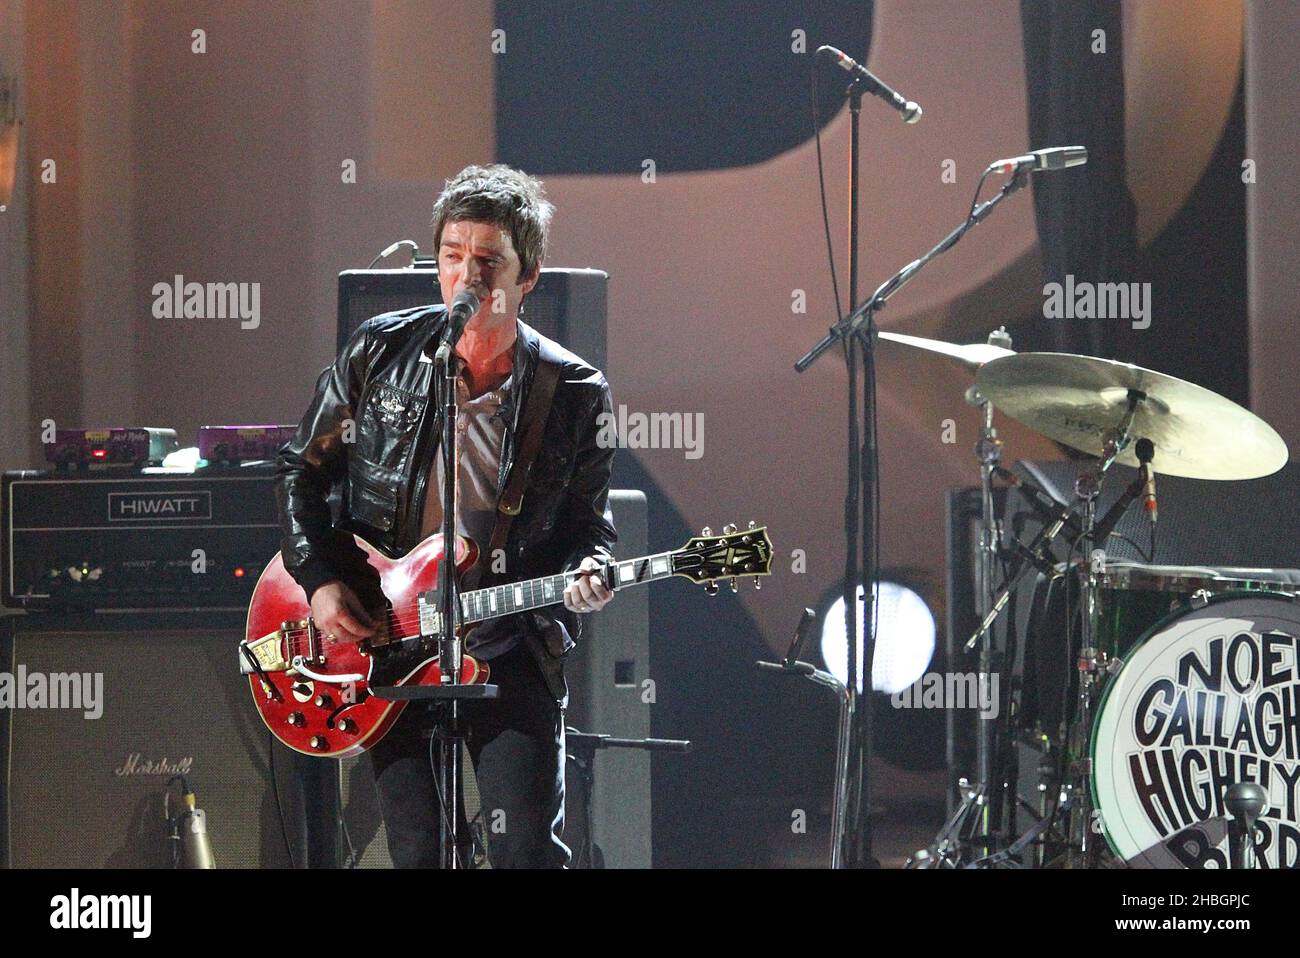 Noel Gallagher's Flying High Birds perform during the 2012 Brit awards at The O2 Arena, London. Stock Photo